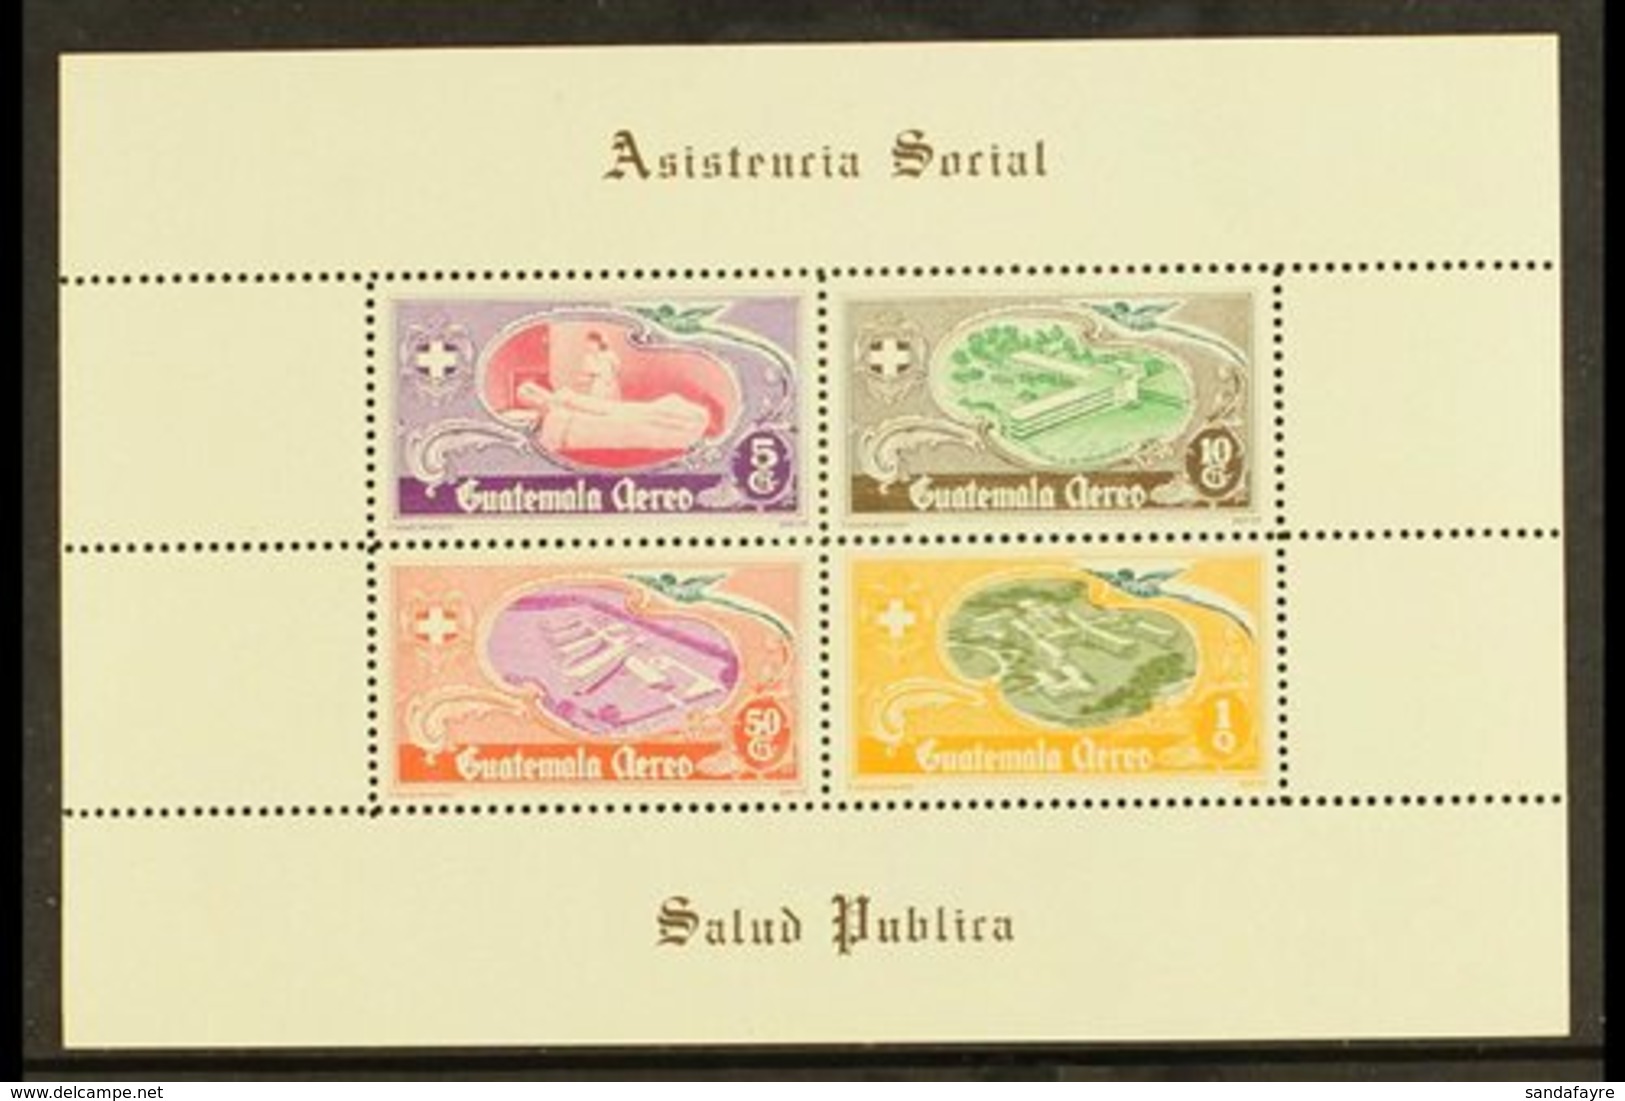 \Y 1950\Y National Hospital Fund Airs Miniature Sheet Showing DOUBLE PRINTED Olive Colour, As SG MS515, Scott C180a, Fin - Guatemala